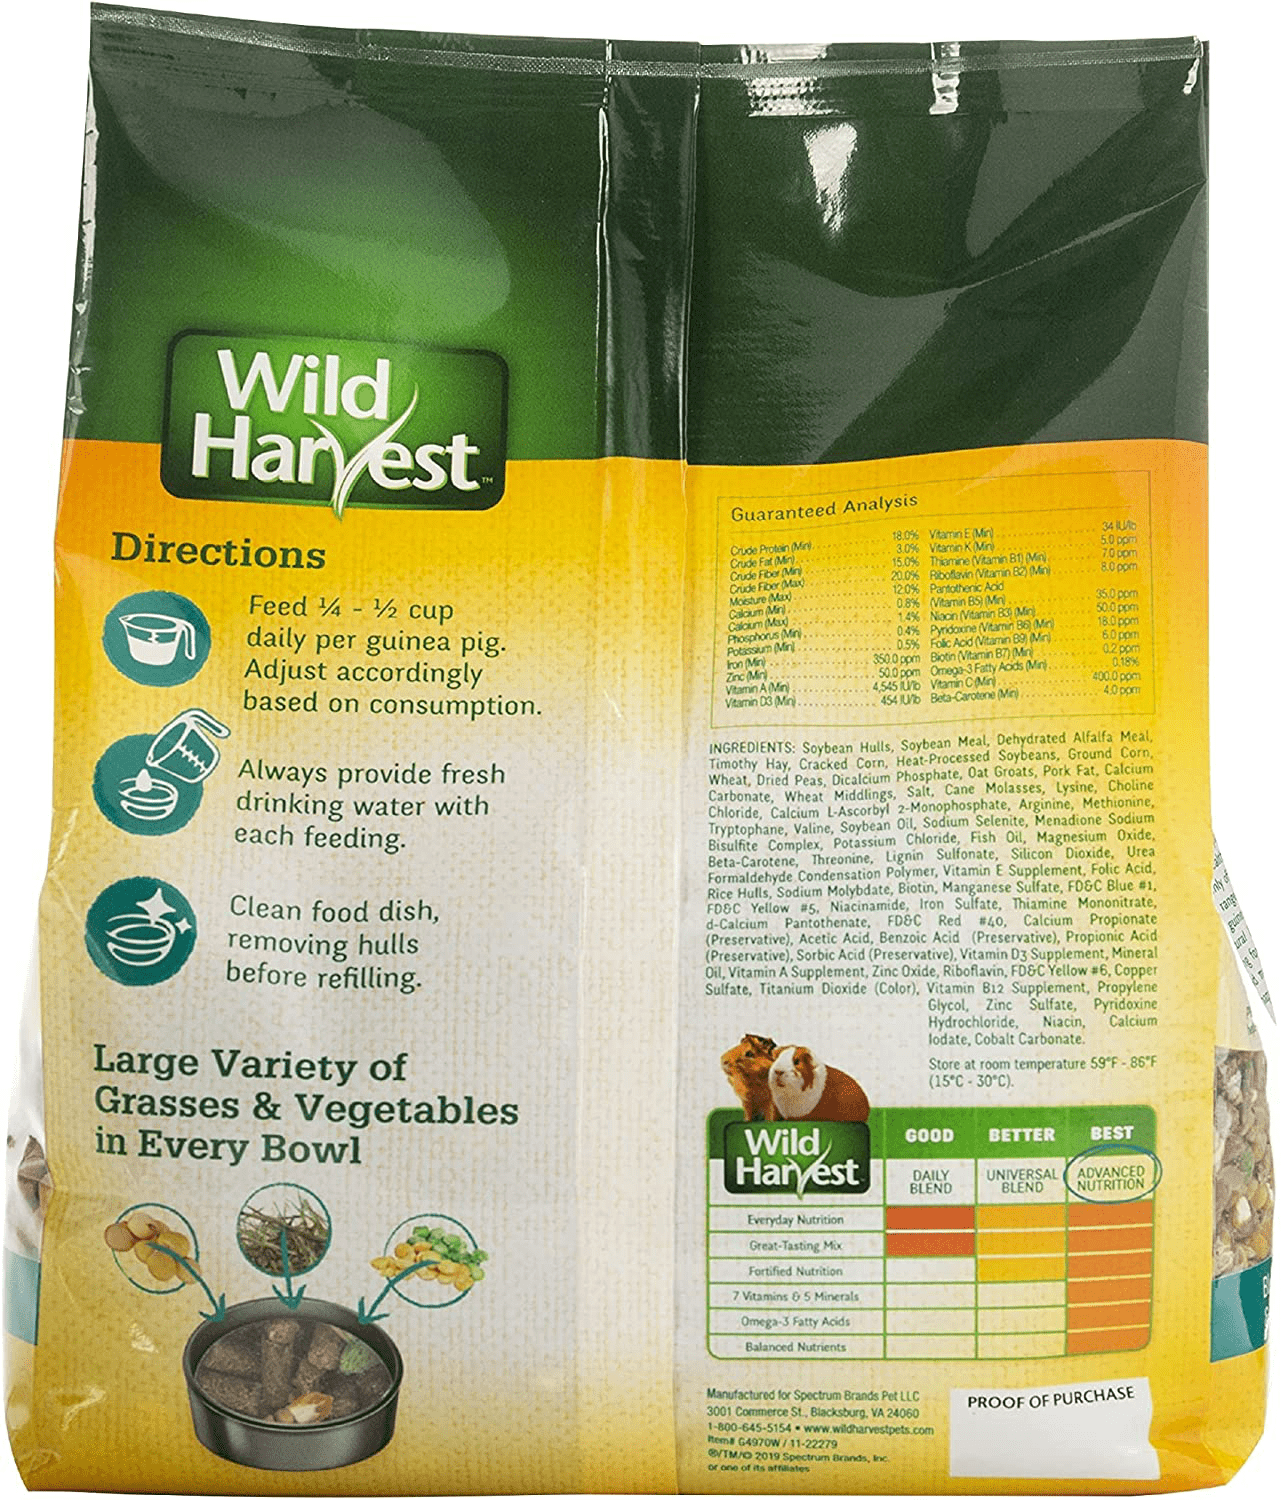 Wild Harvest Advanced Nutrition Diet for Guinea Pigs (Packaging May Vary)